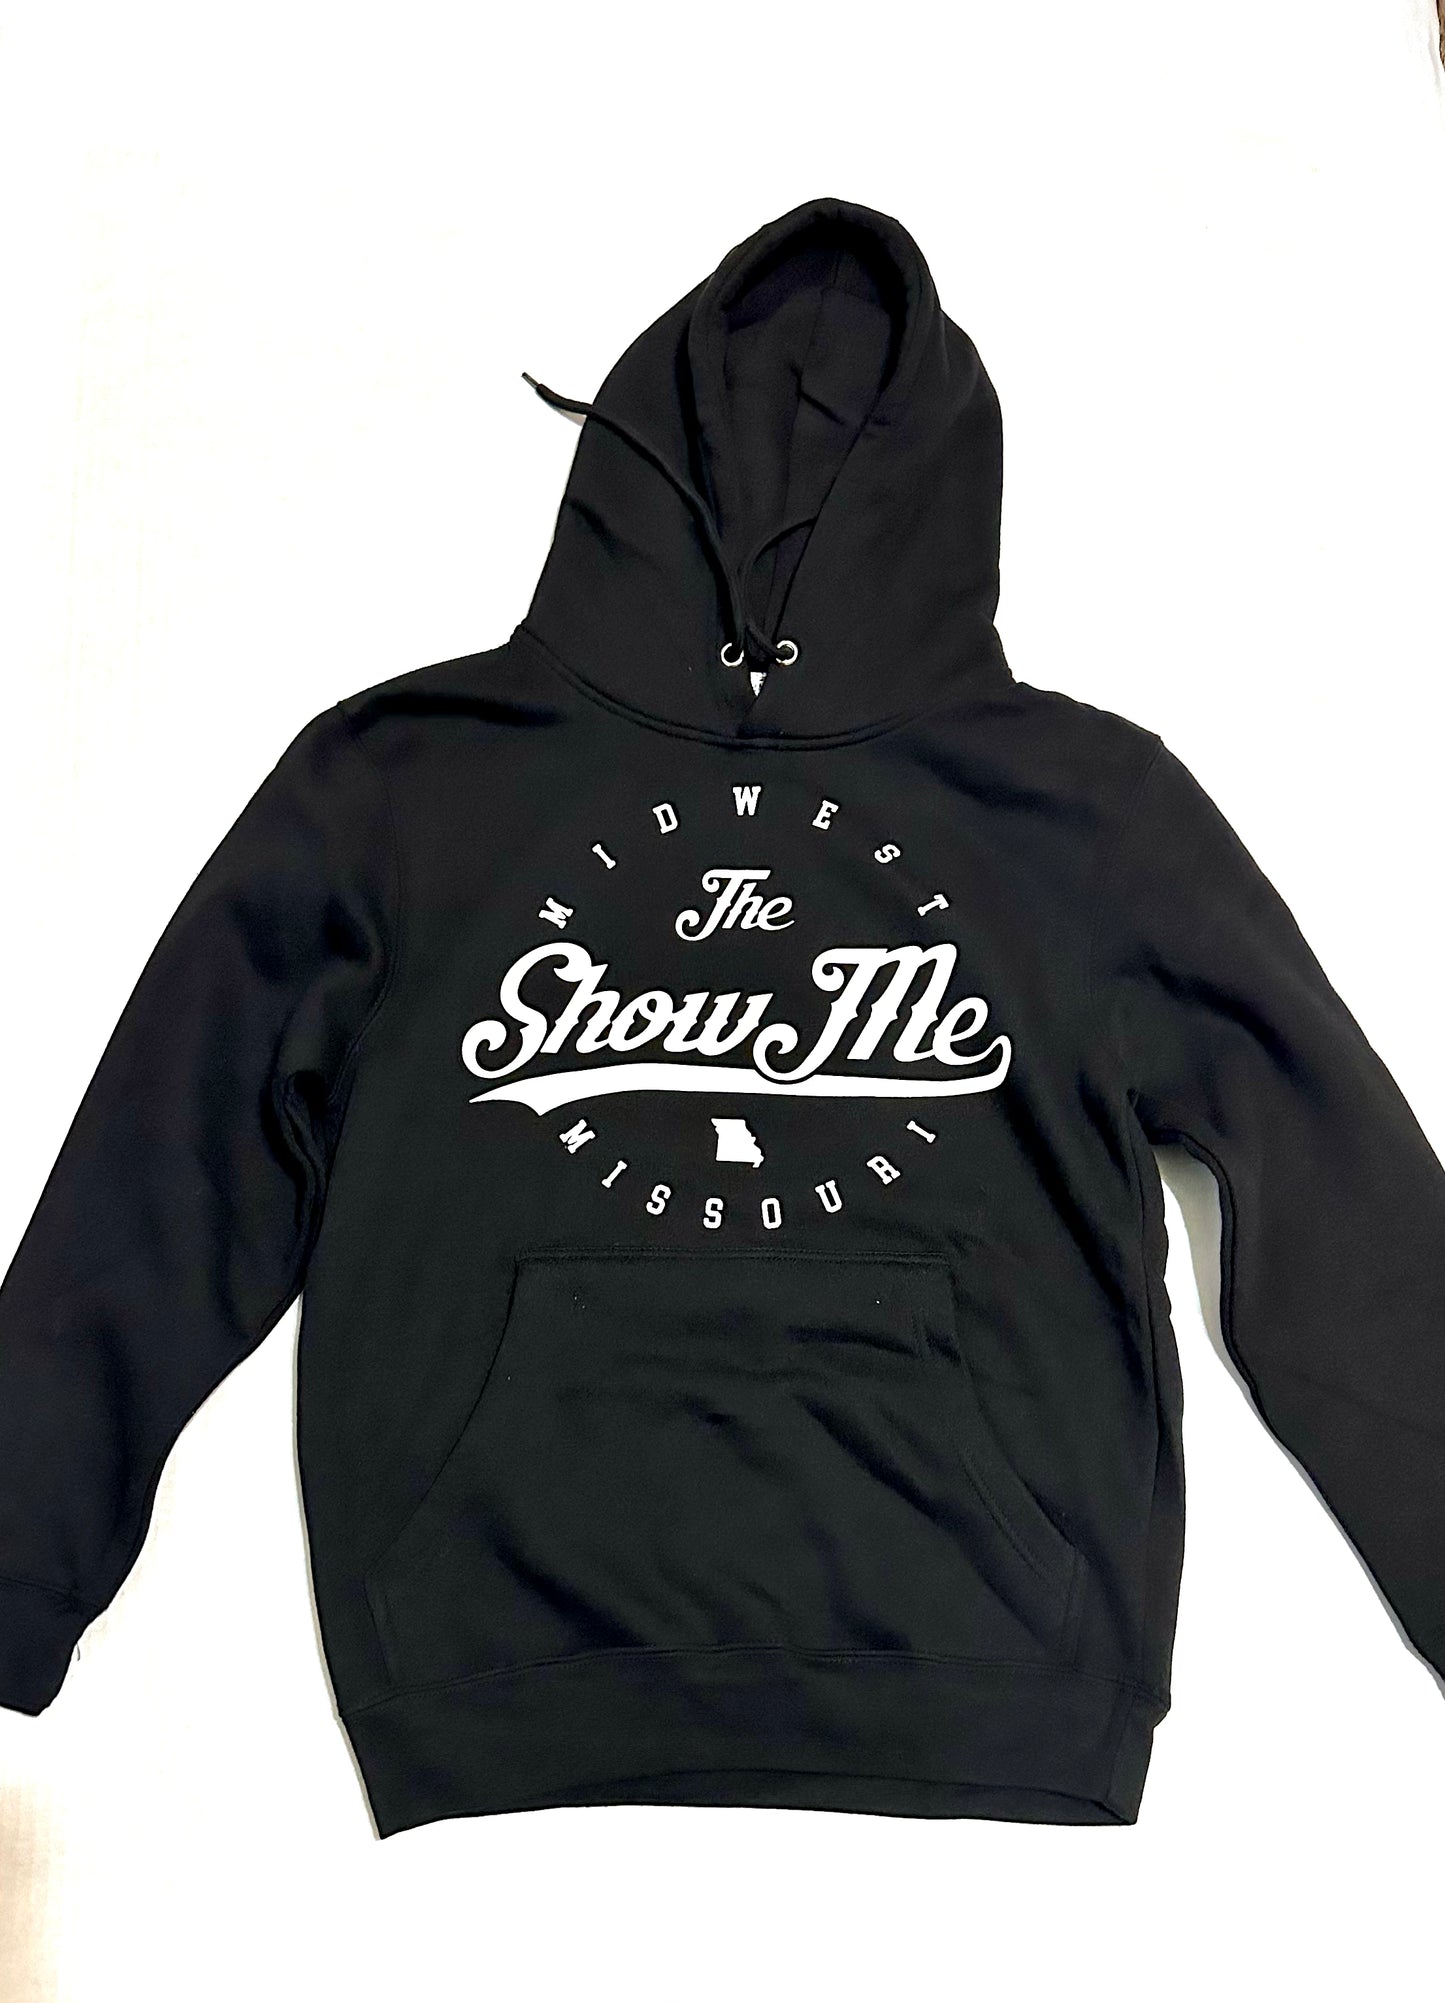 Black and White Graphic Hoodie